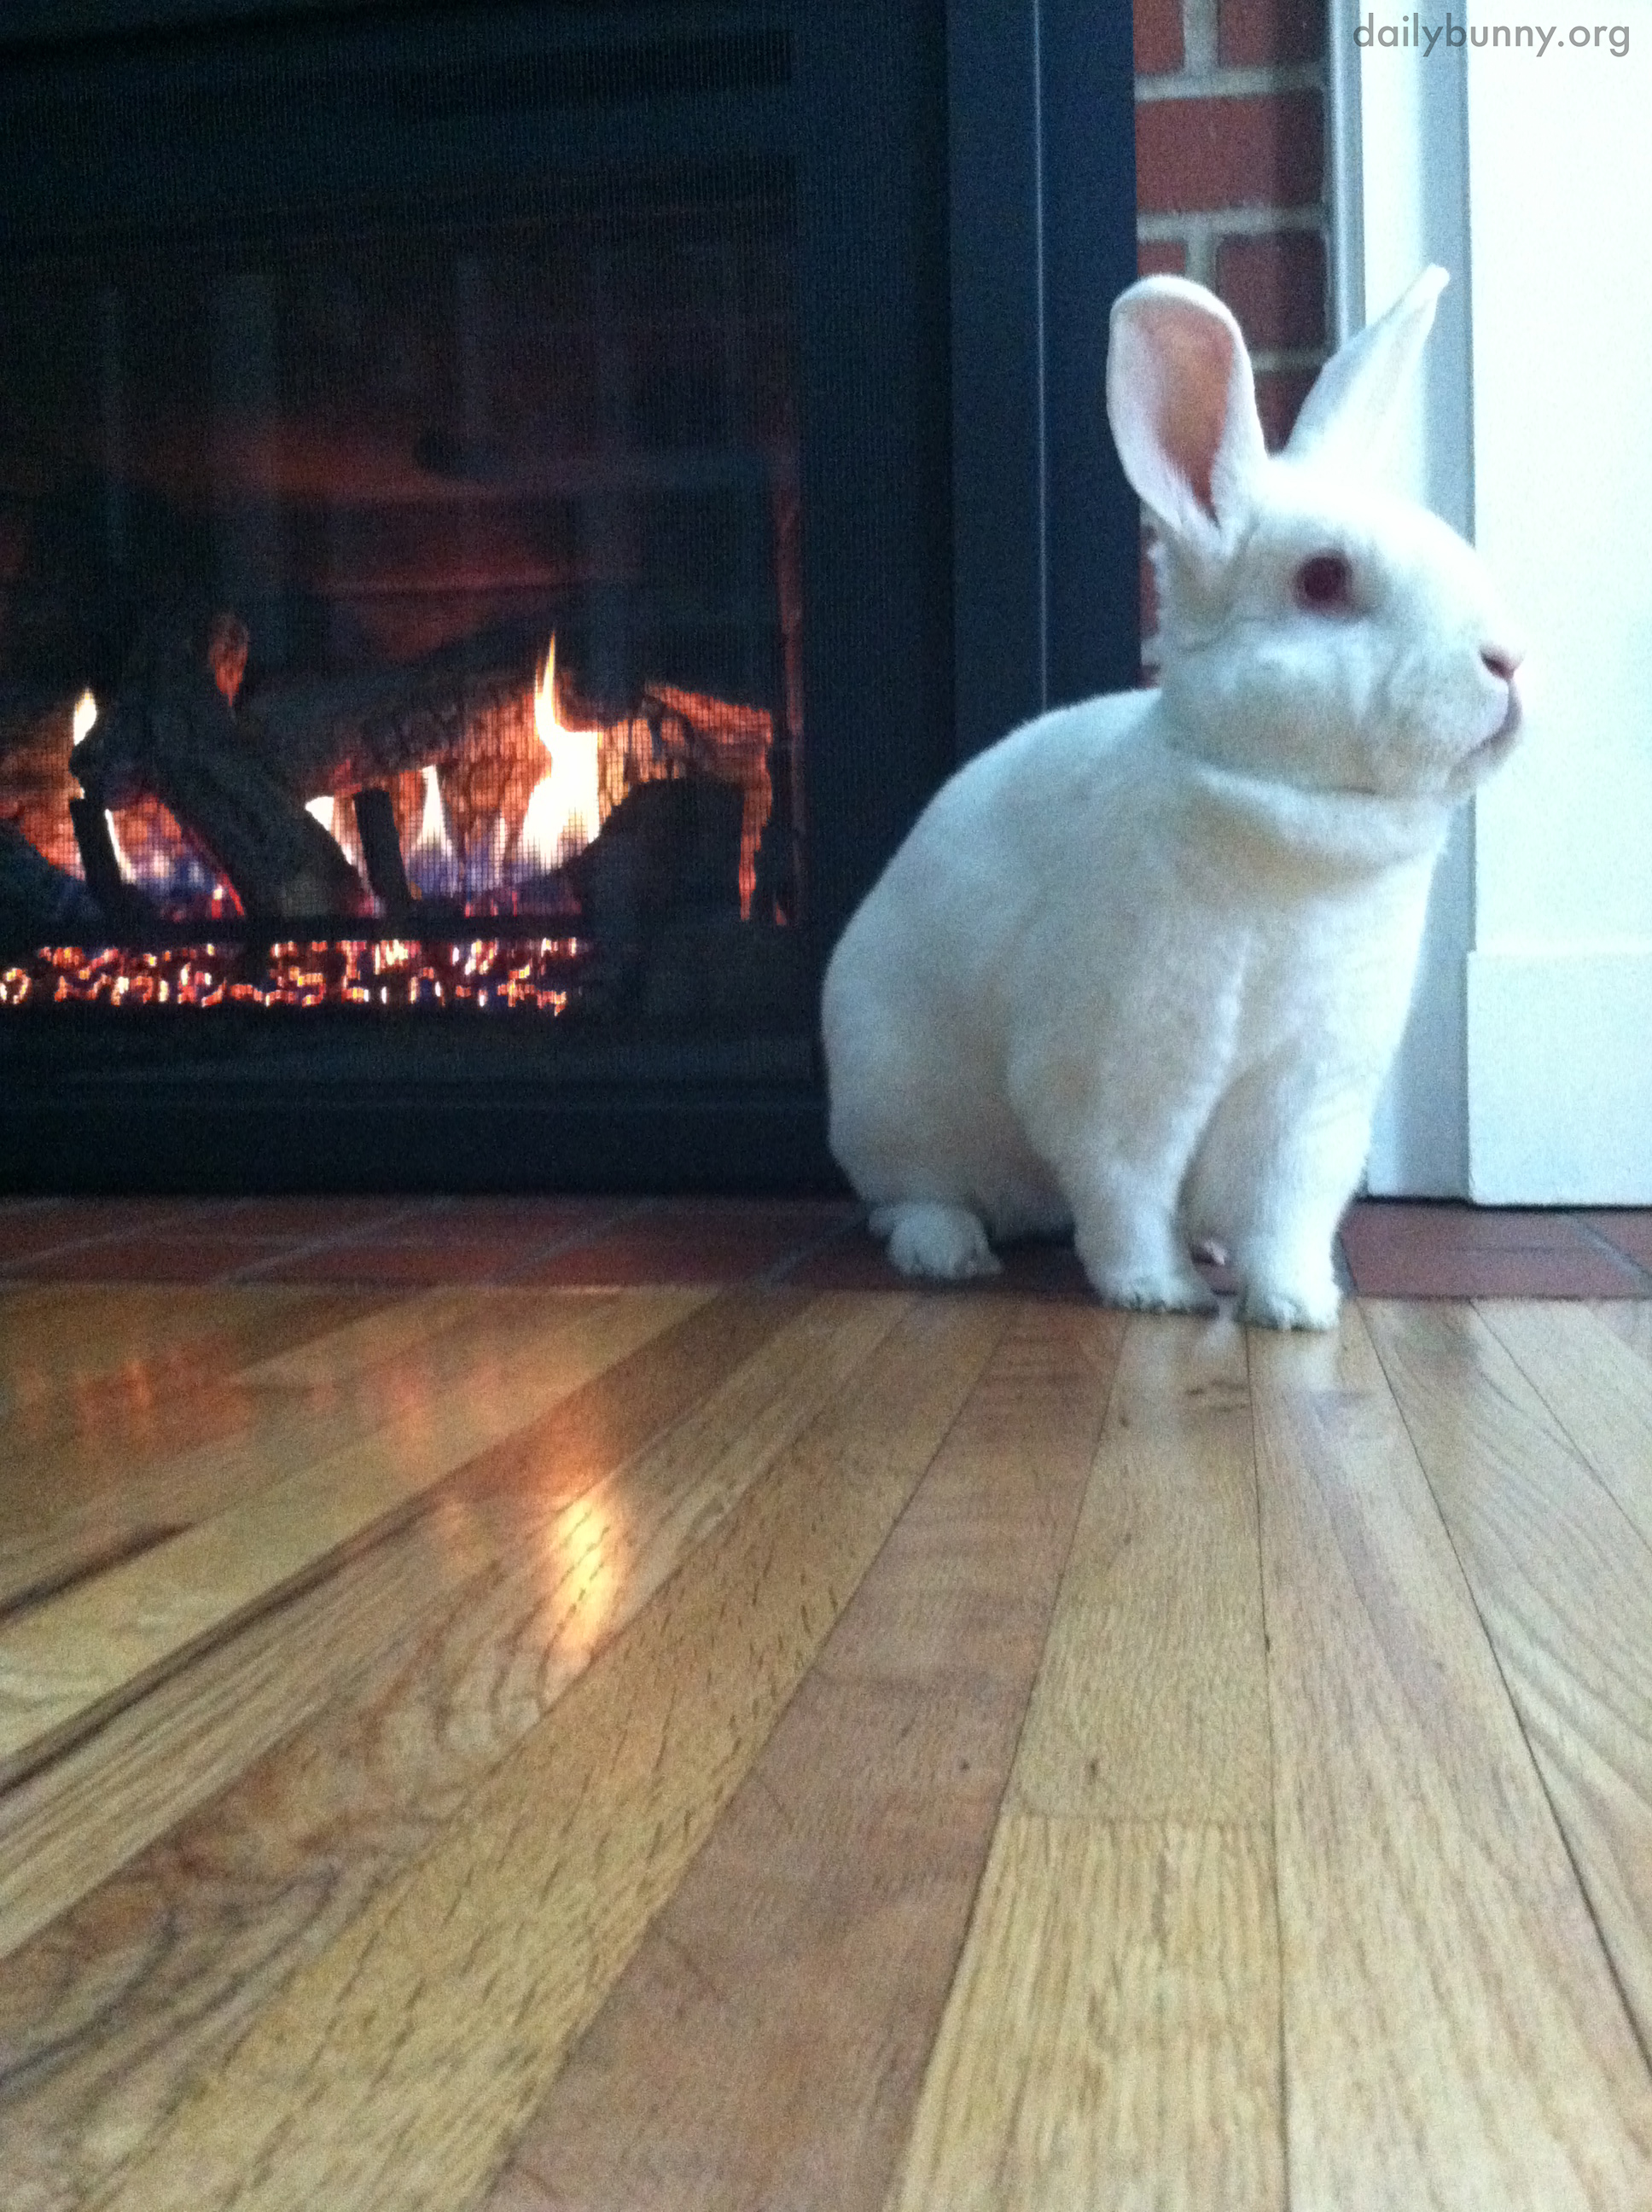 Bunny Warms His Bum by the Fire